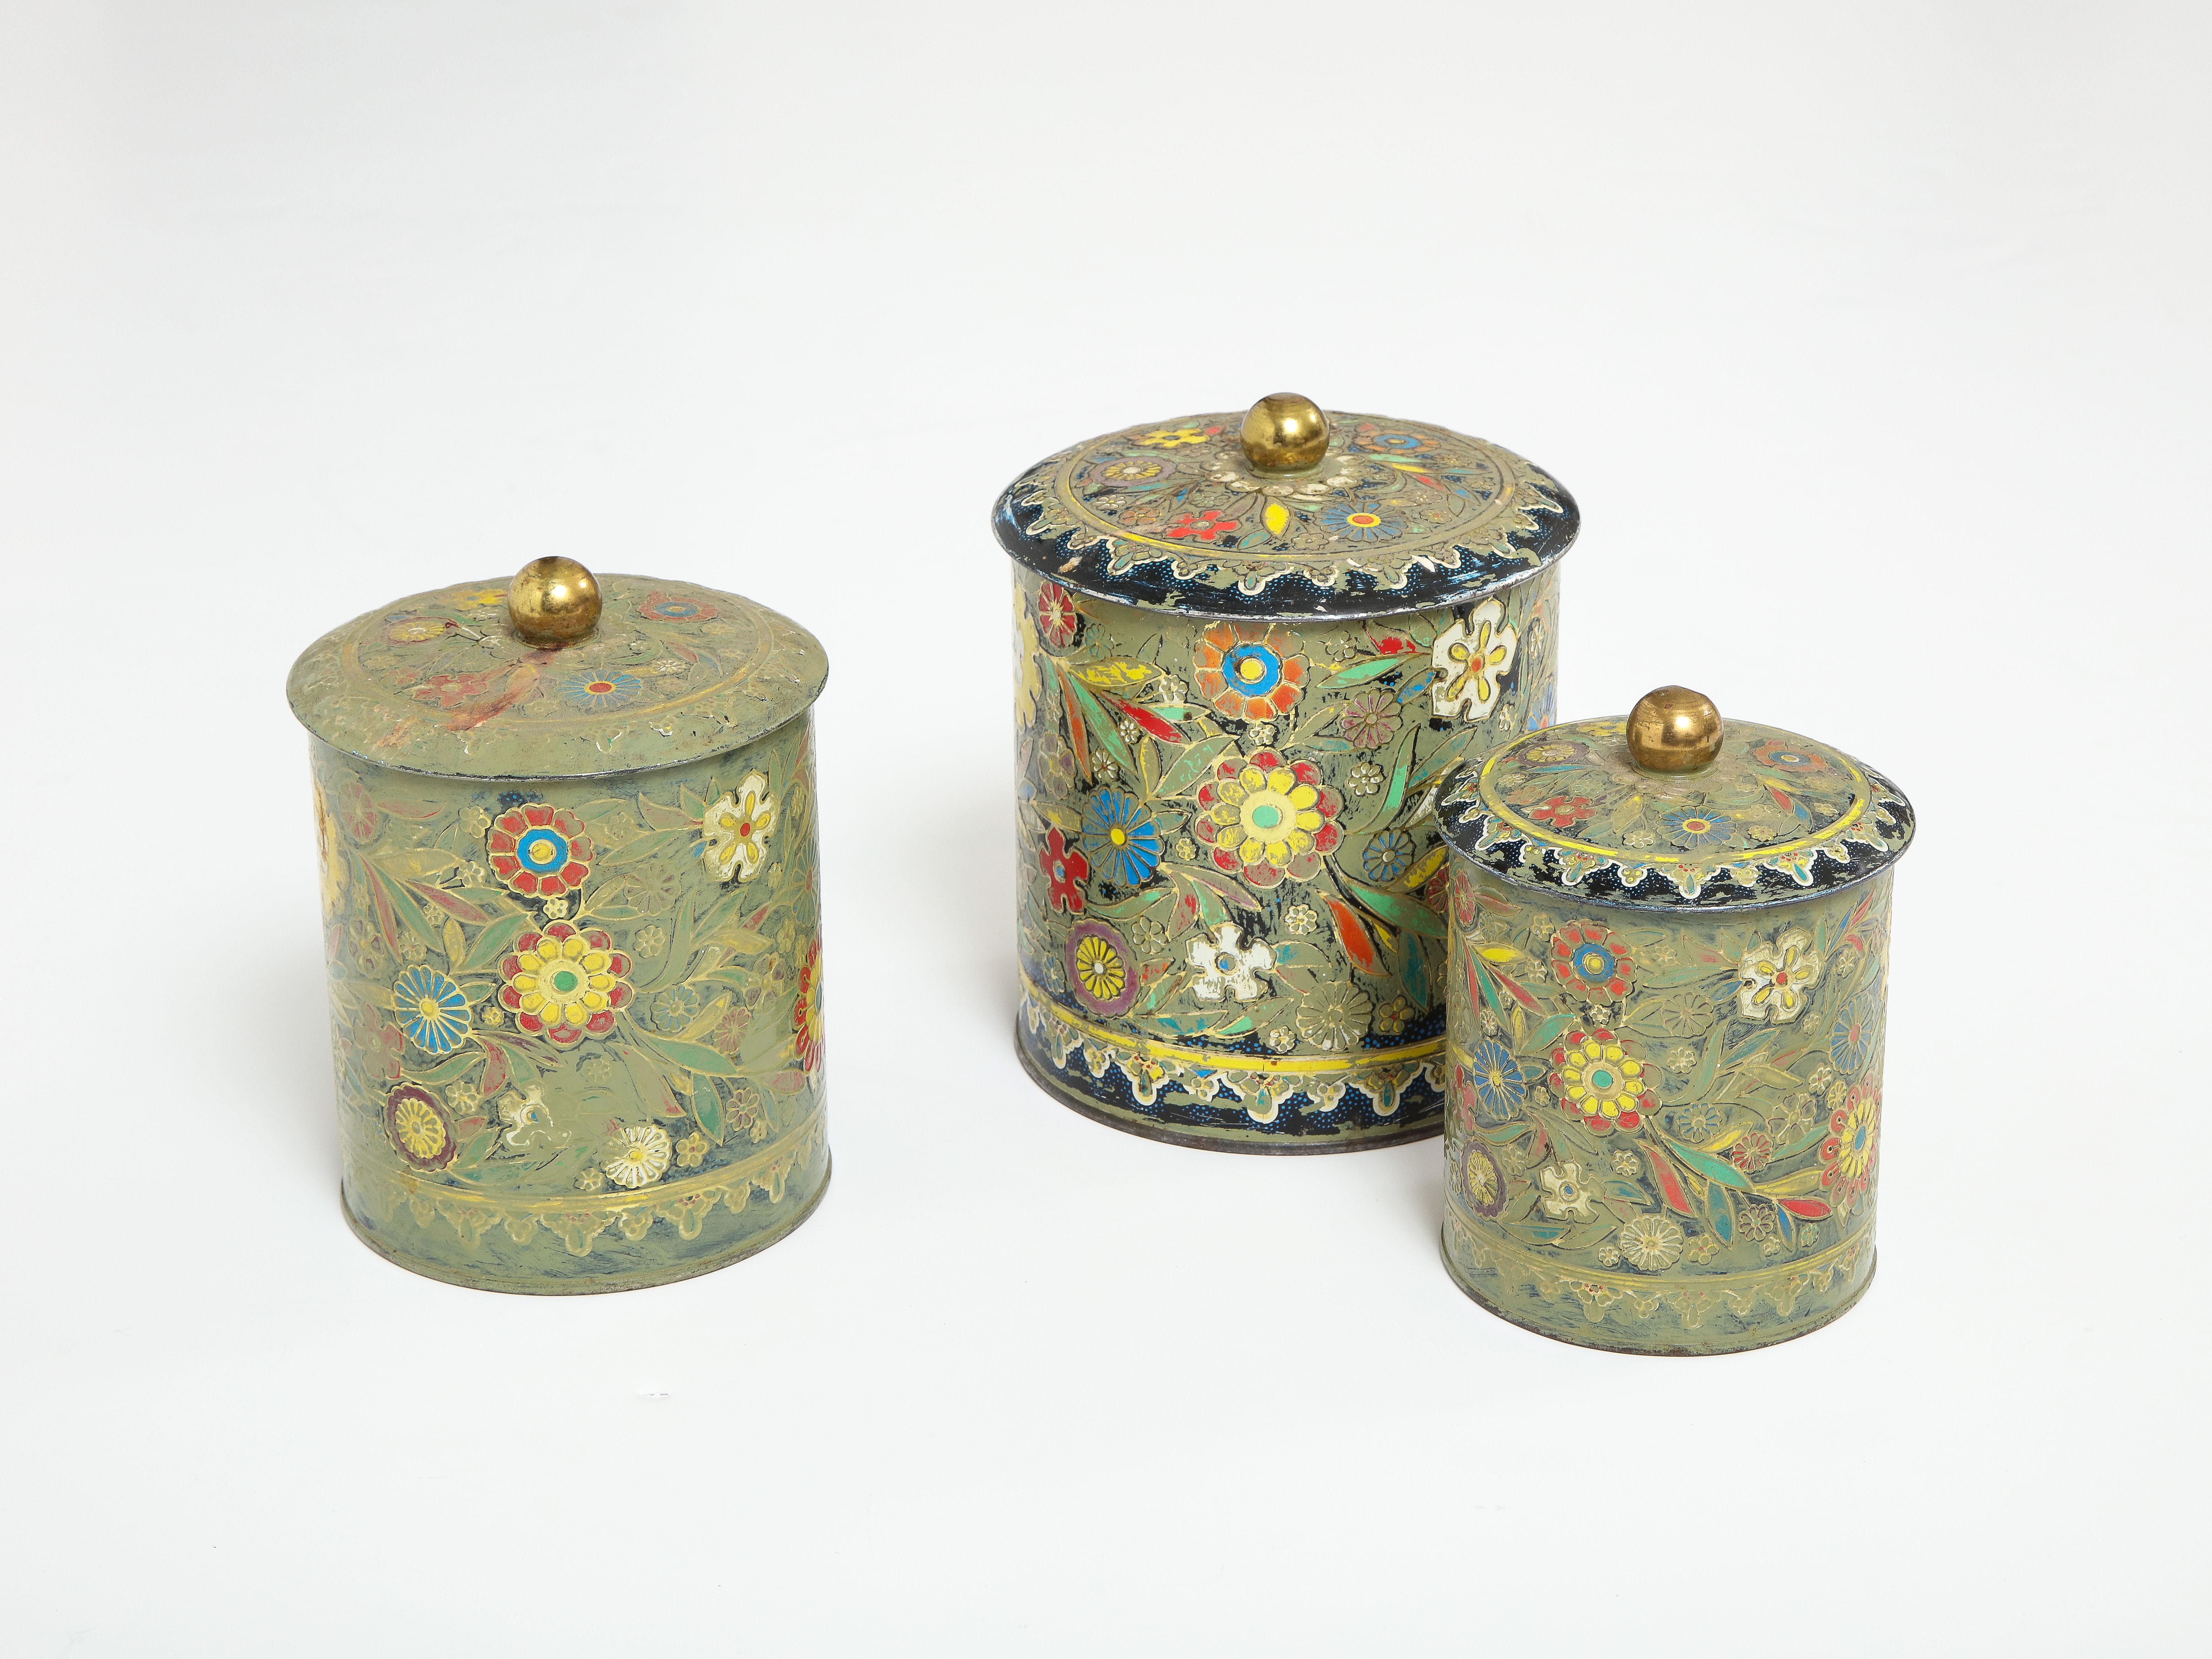 20th Century English Art Deco Enameled Tin Cannisters For Sale